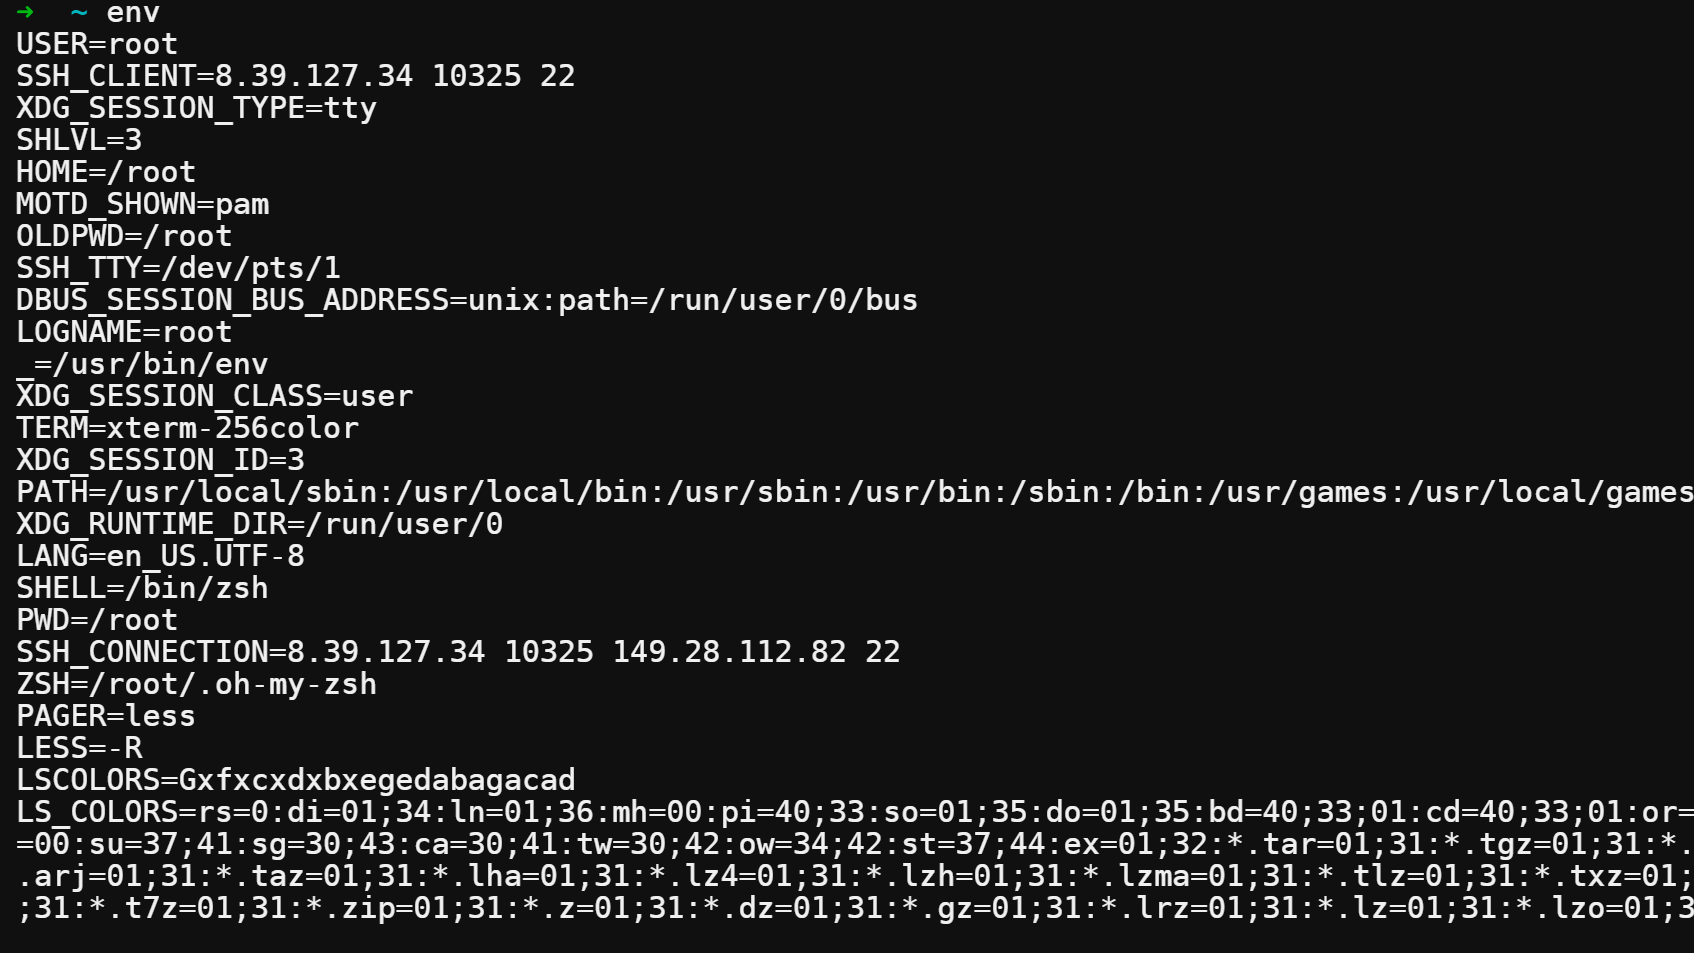 Verify that Oh My Zsh is installed and working